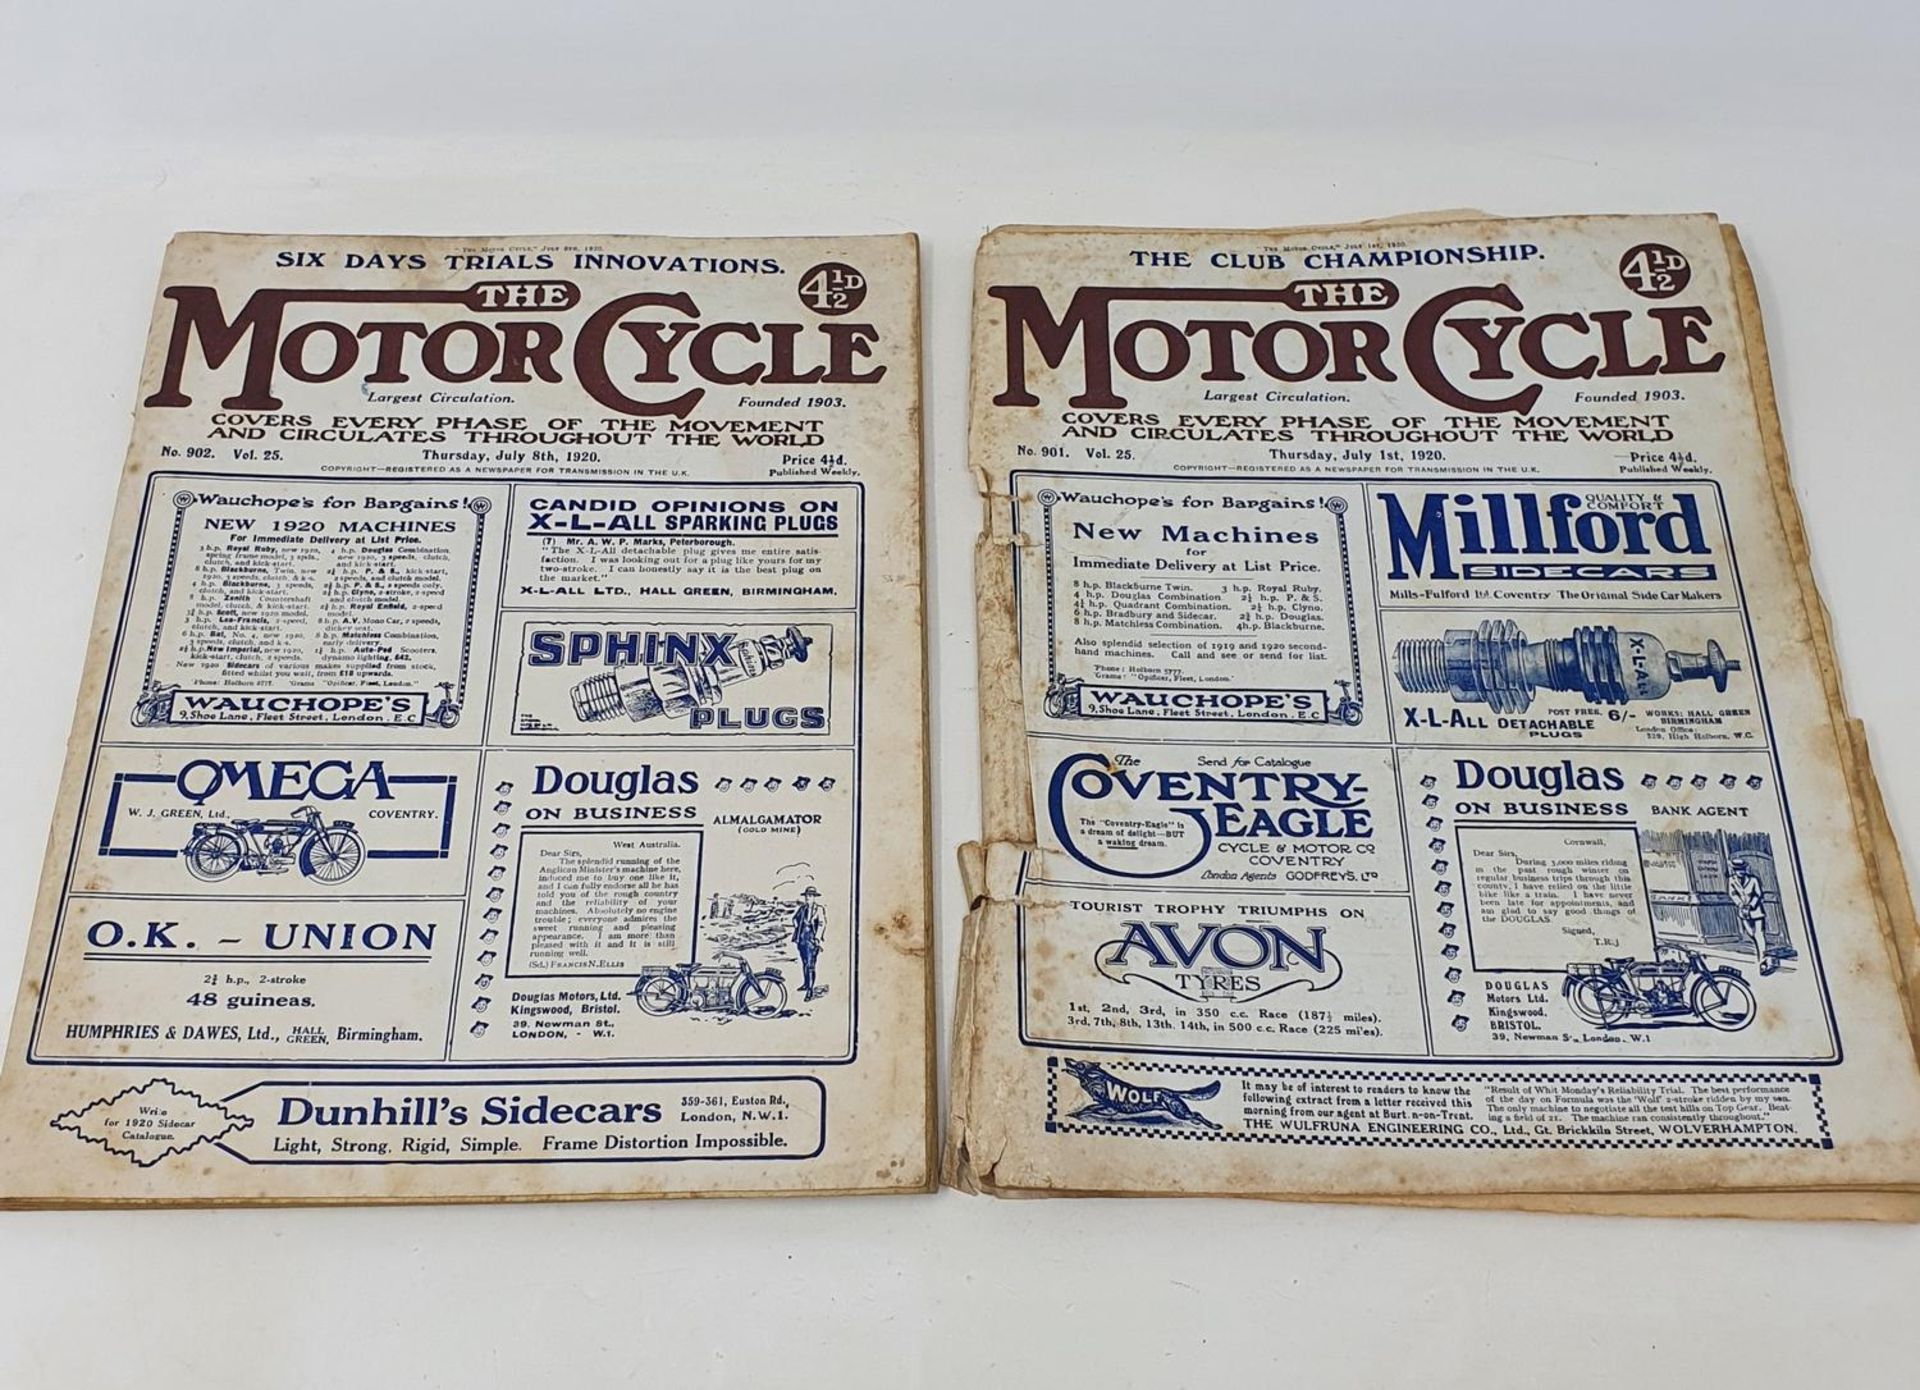 The Motor Cycle magazine, No. 901 Thursday July 1 1920, and another, No. 902 Thursday July 8 1920 (